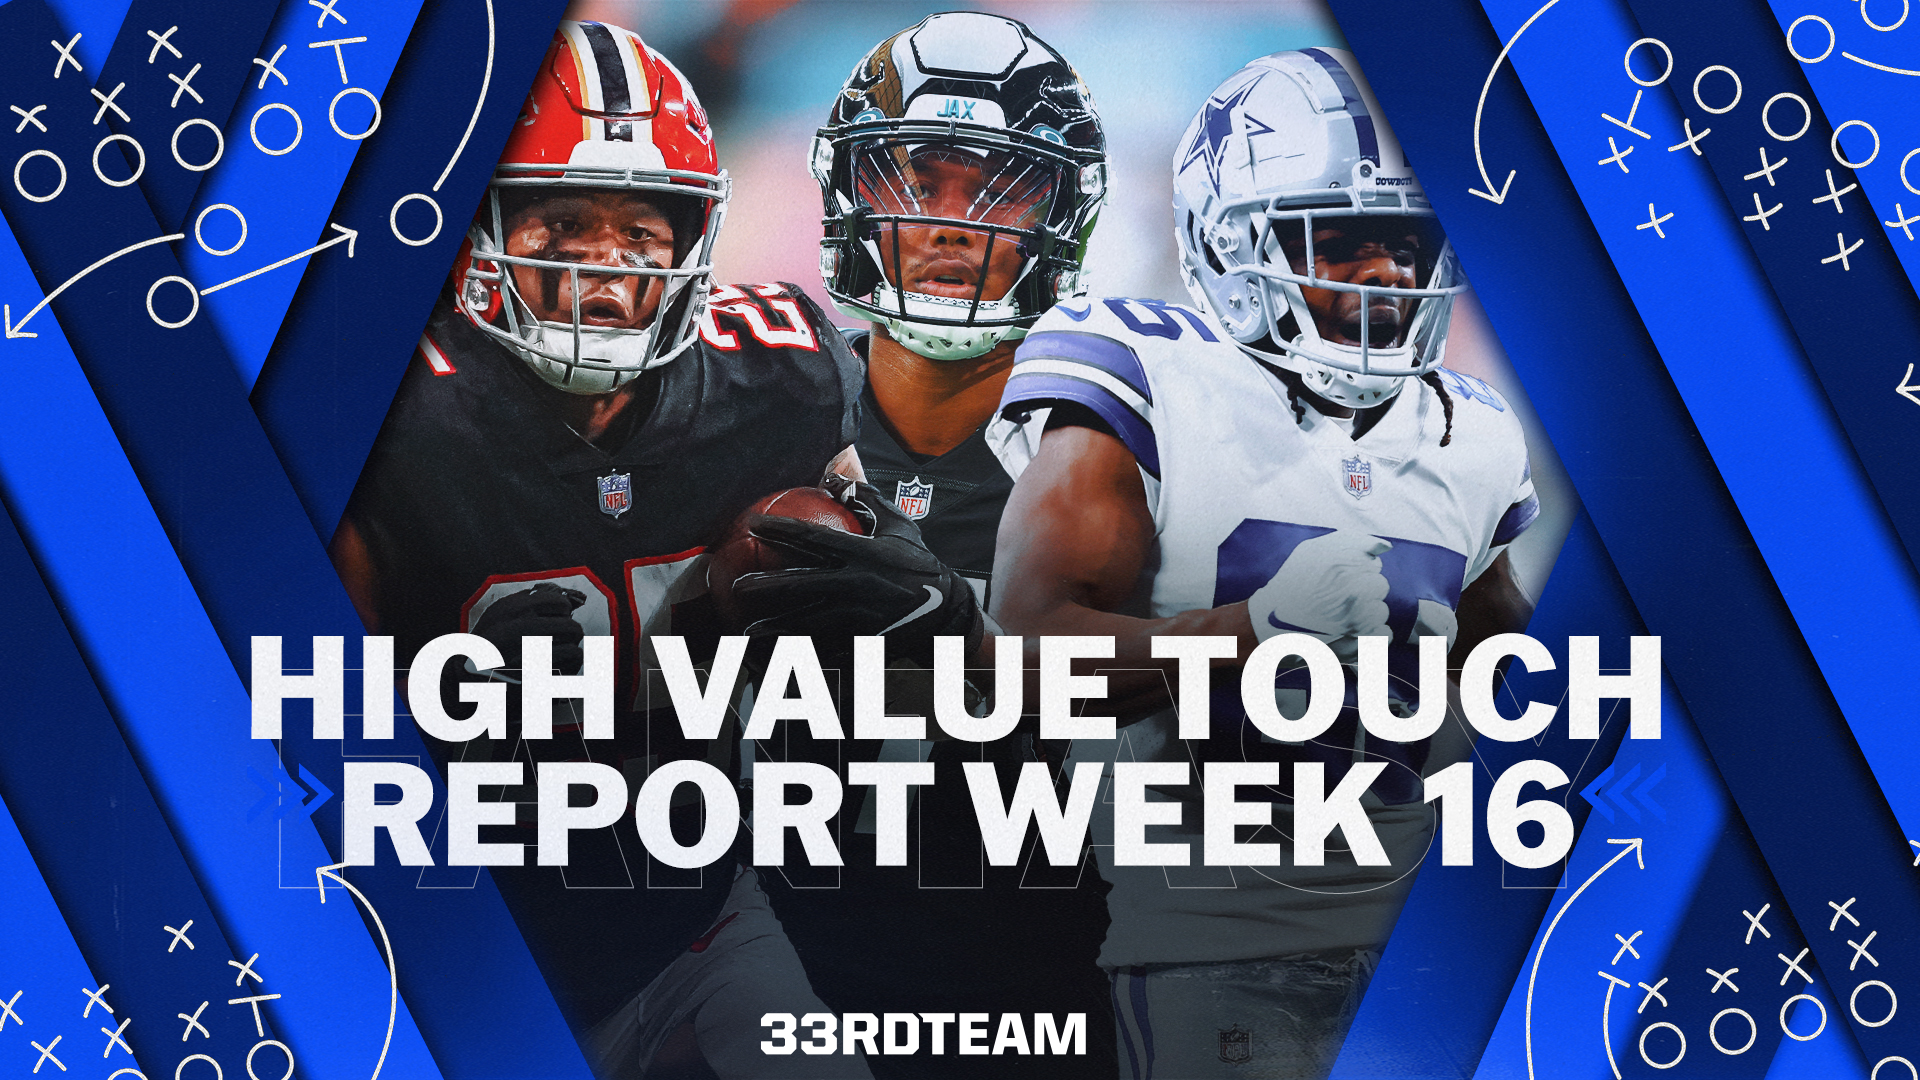 High-Value Touch Report: NFL Week 15 Fantasy Football Rushing, Receiving Data